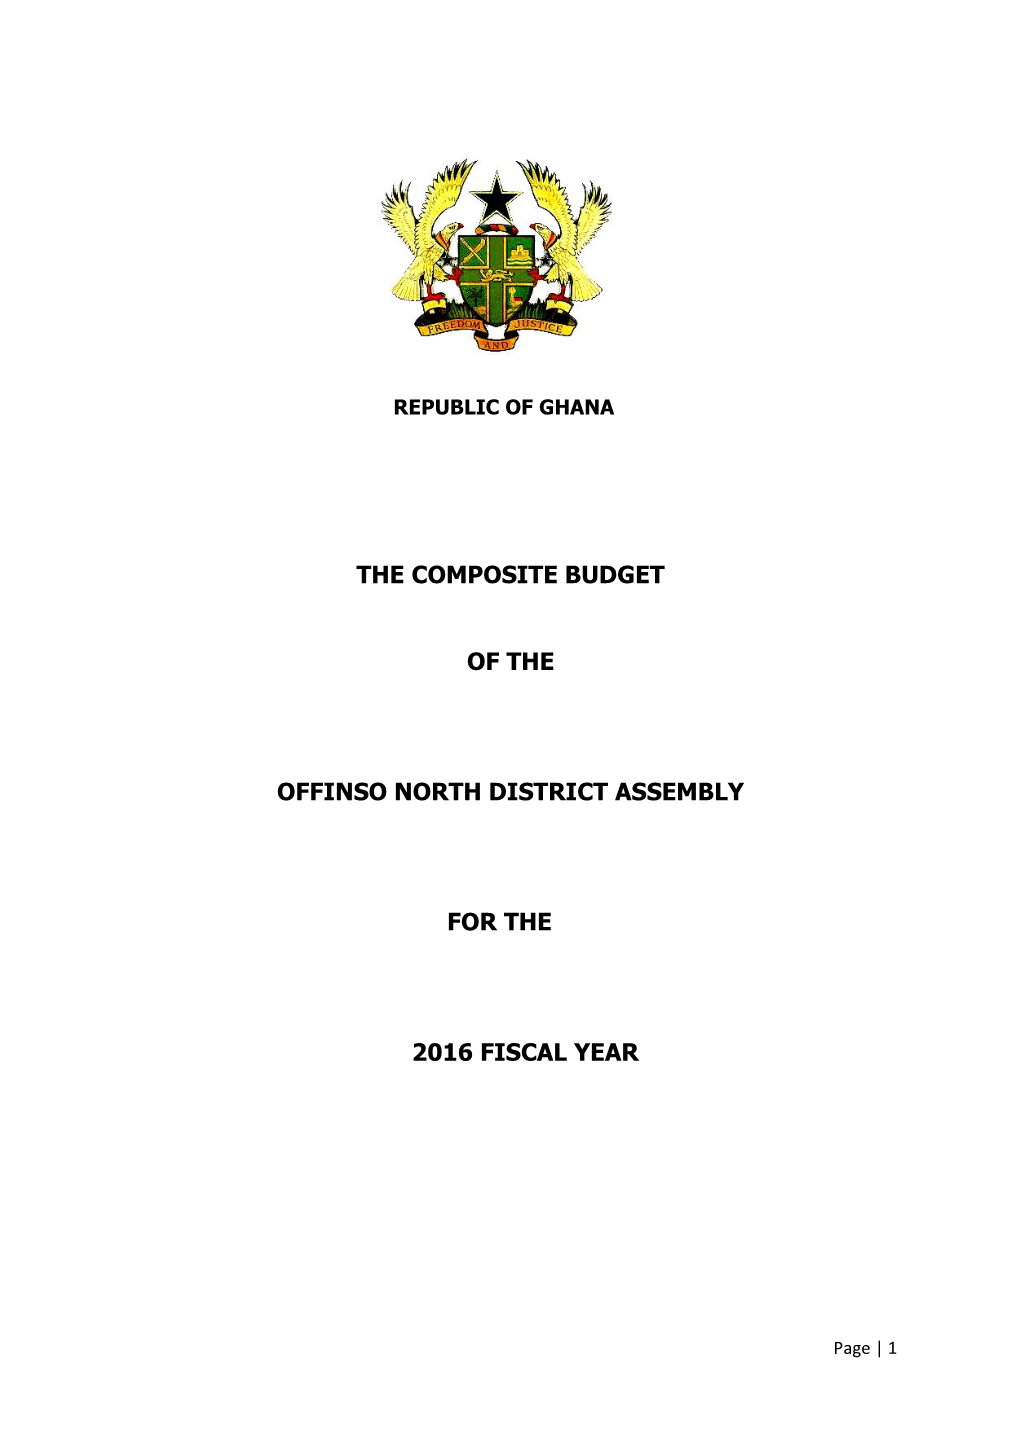 The Composite Budget of the Offinso North District Assembly for the 2016